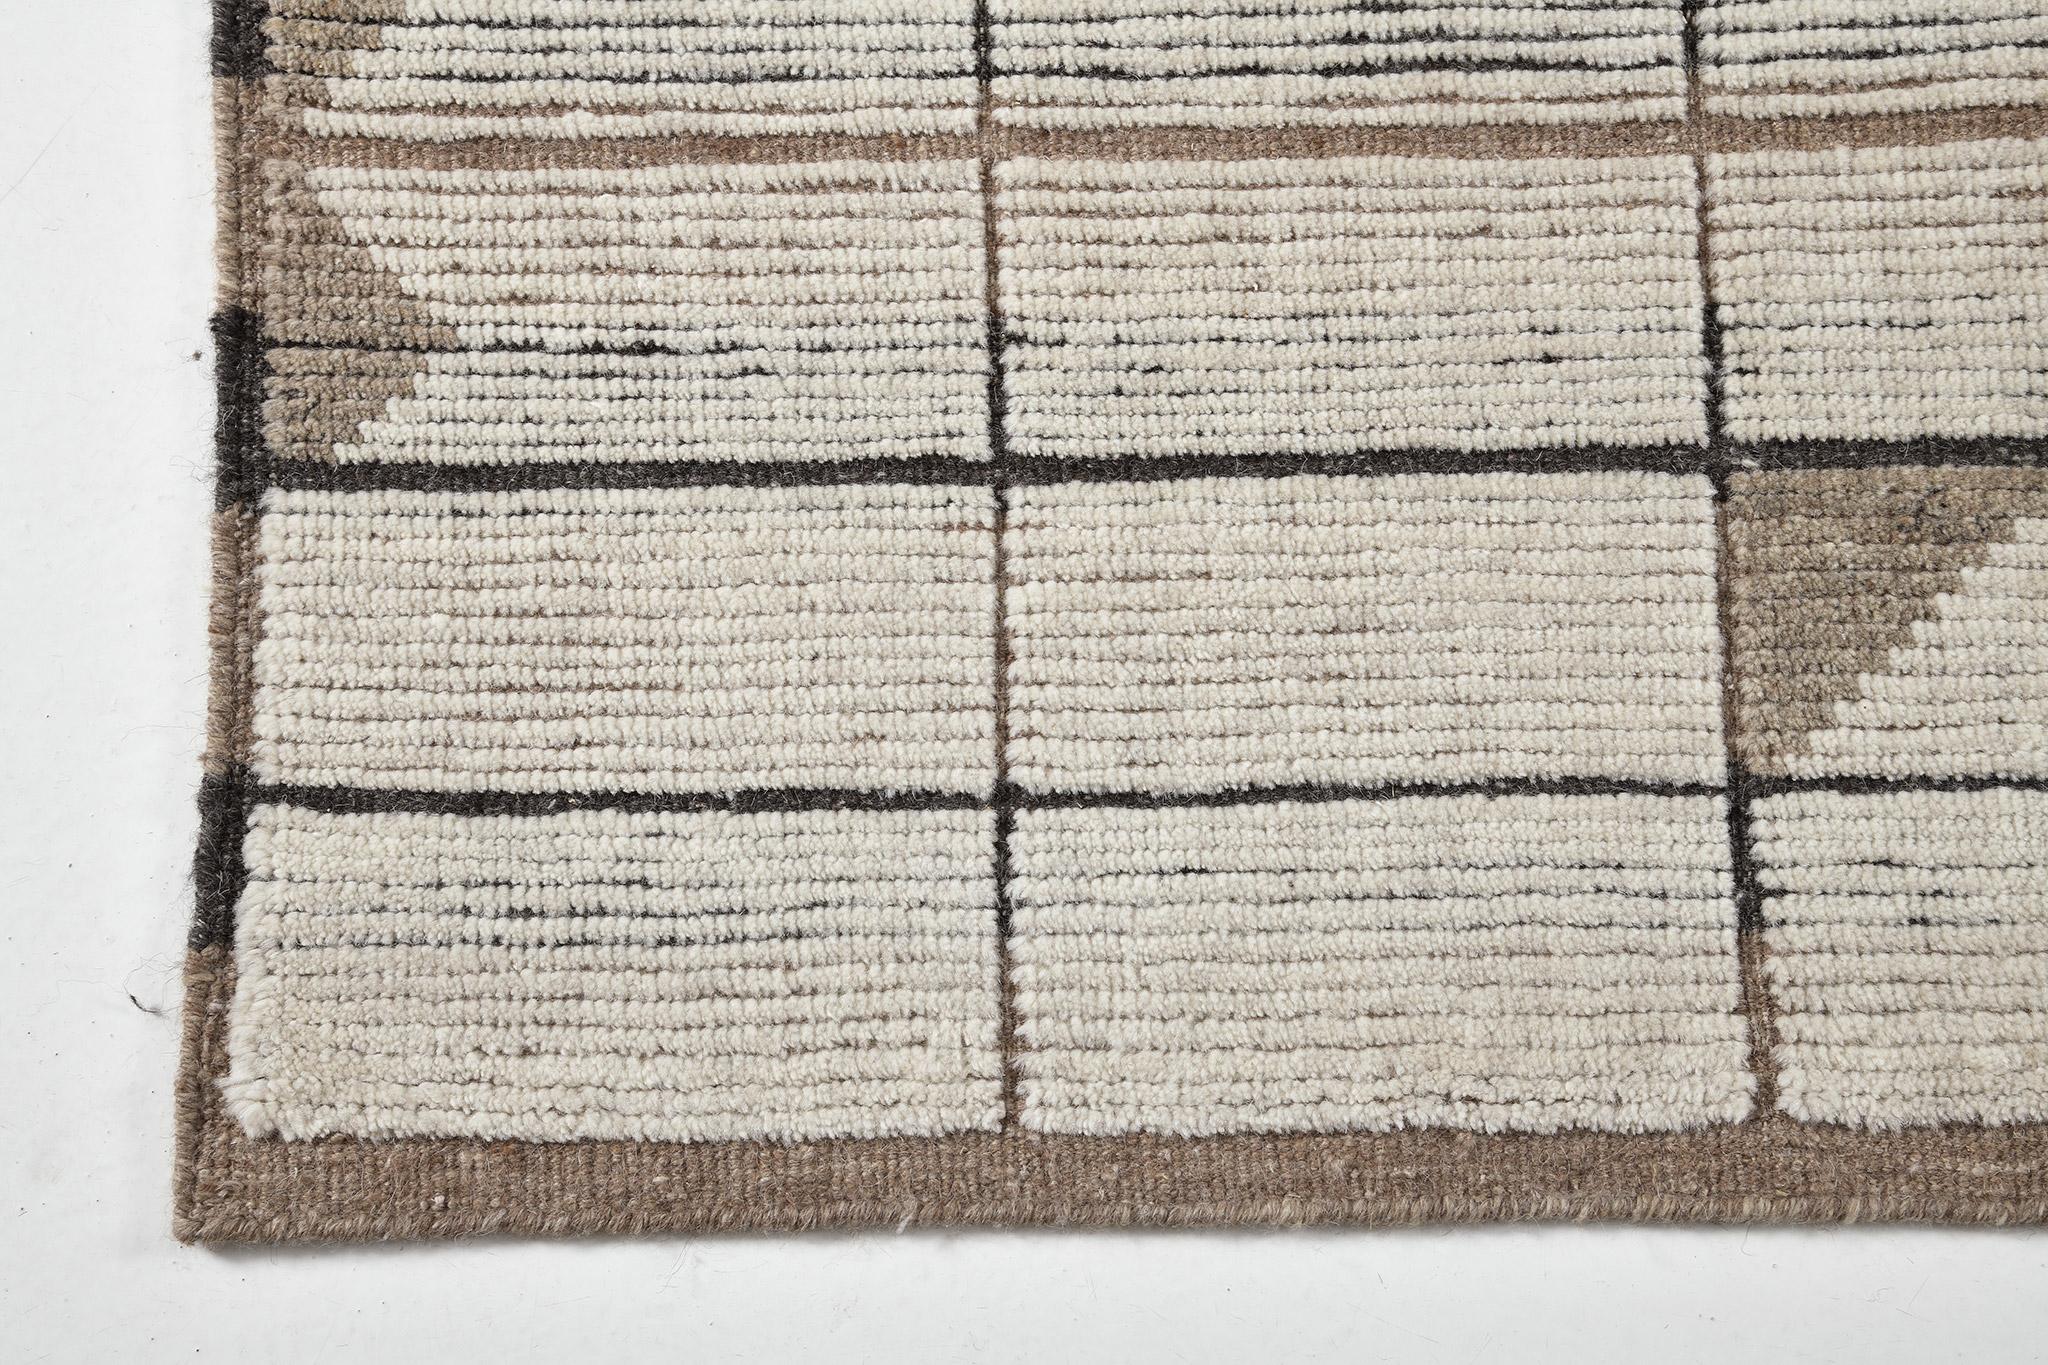 Bouchet’ in Estancia Collection features rectangular grids running along the entirety of this breathtaking rug. Rendered in the earthy shades of ecru, charcoal and camel, features the puzzle like forming lozenges which creates statement and